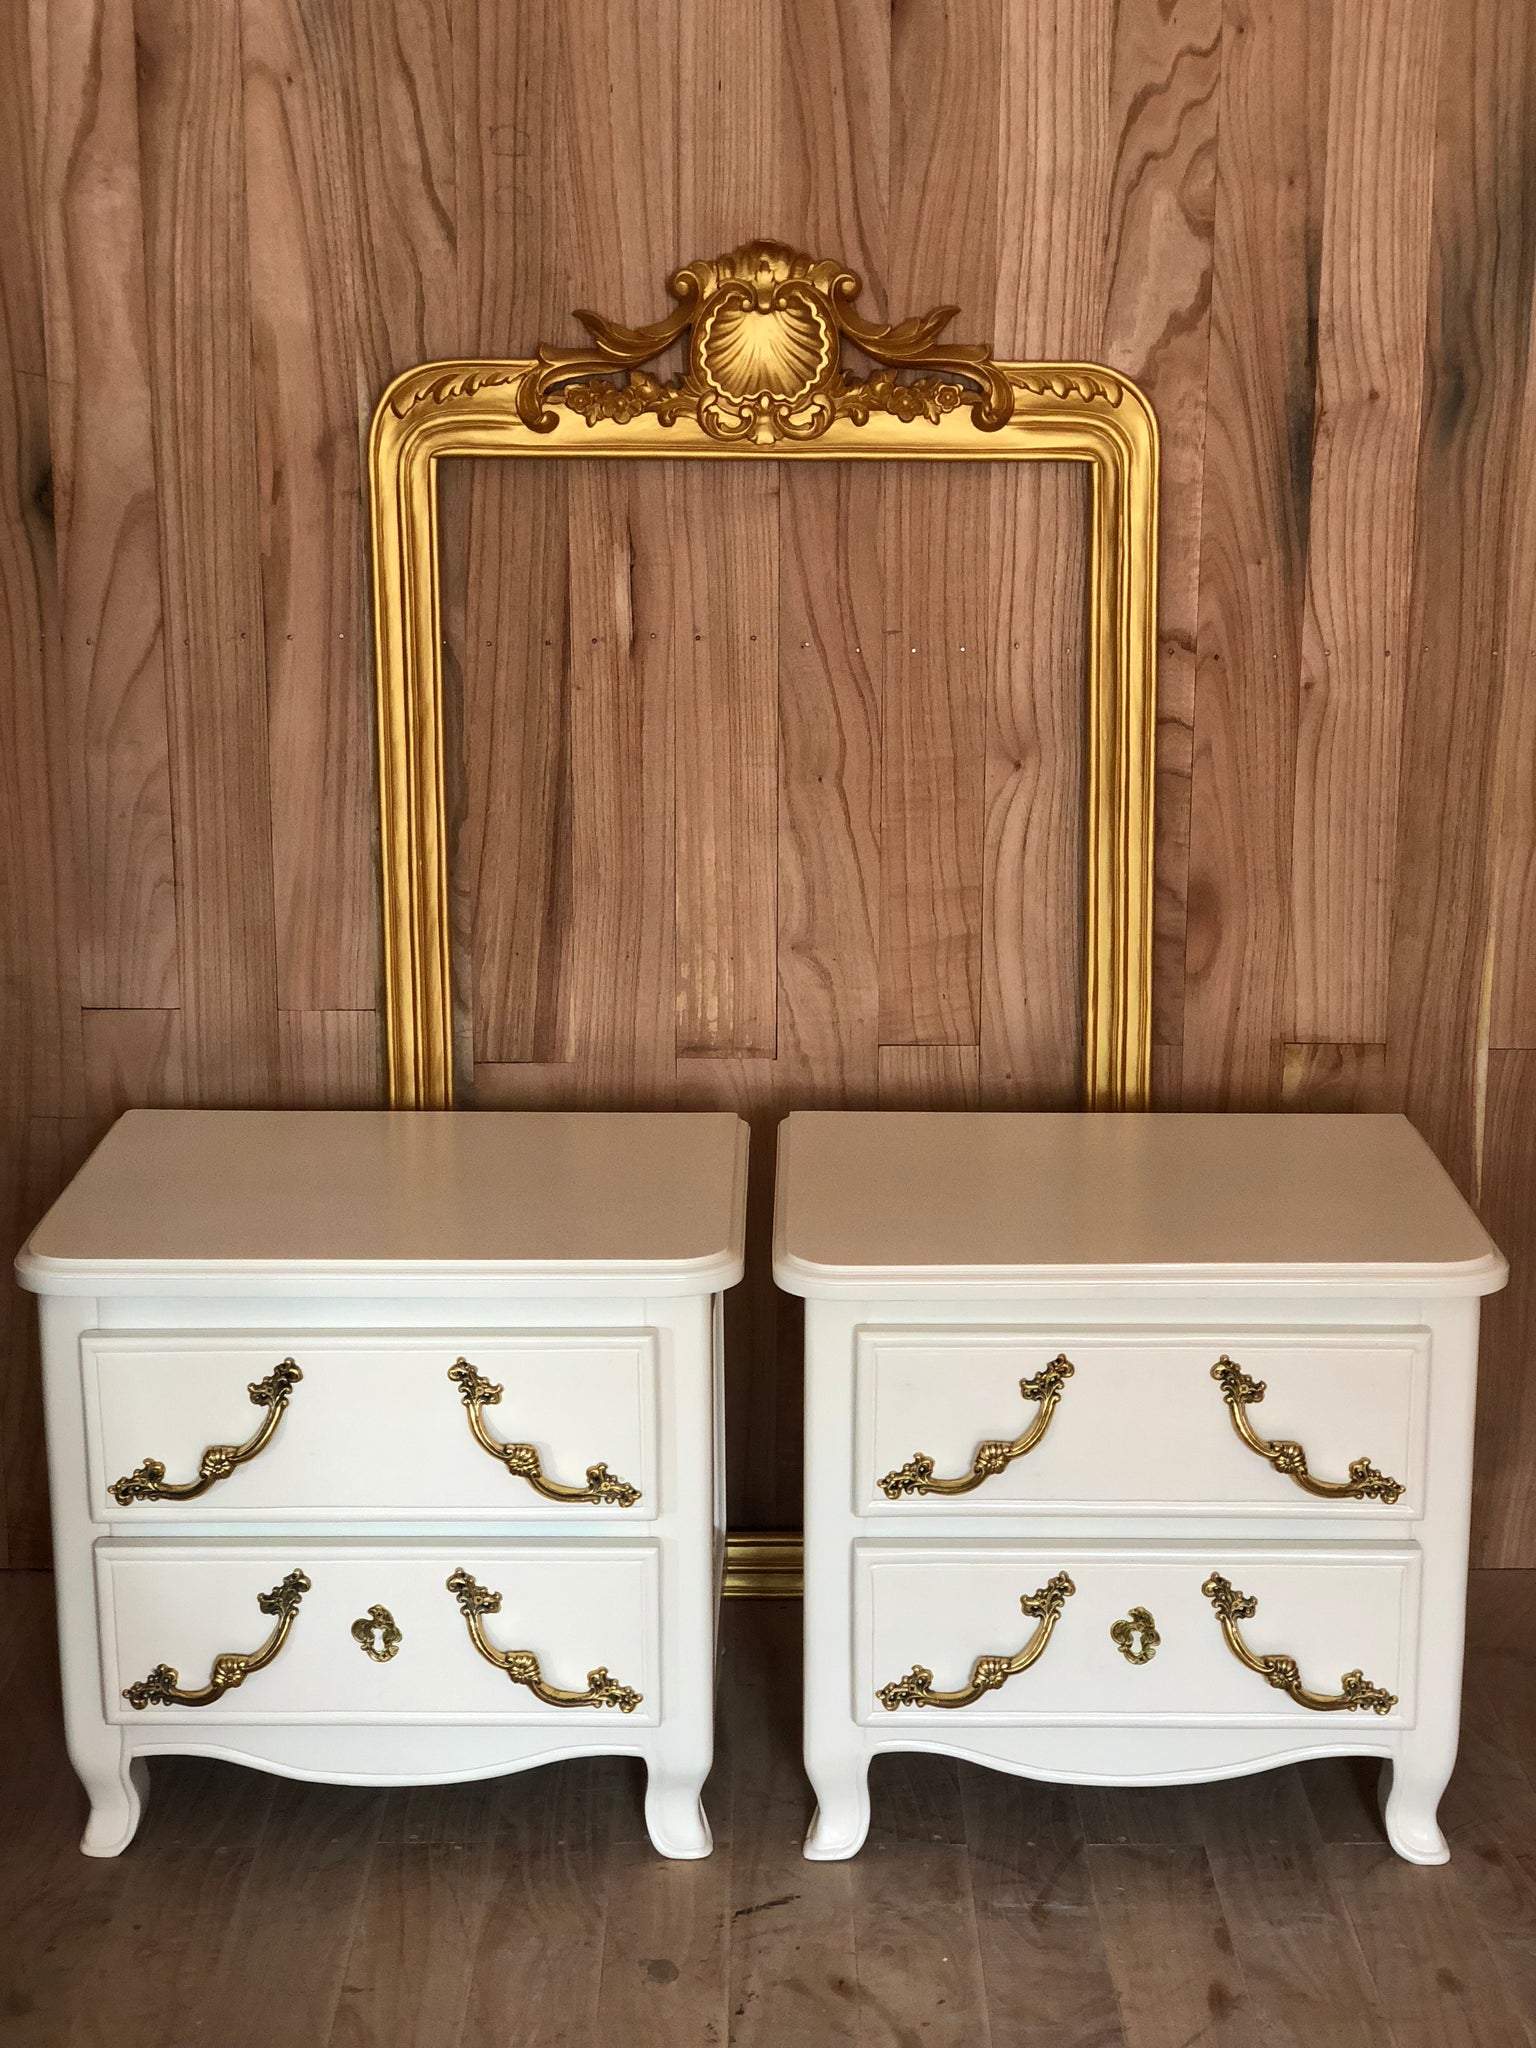 Classic nightstand with spacious drawers